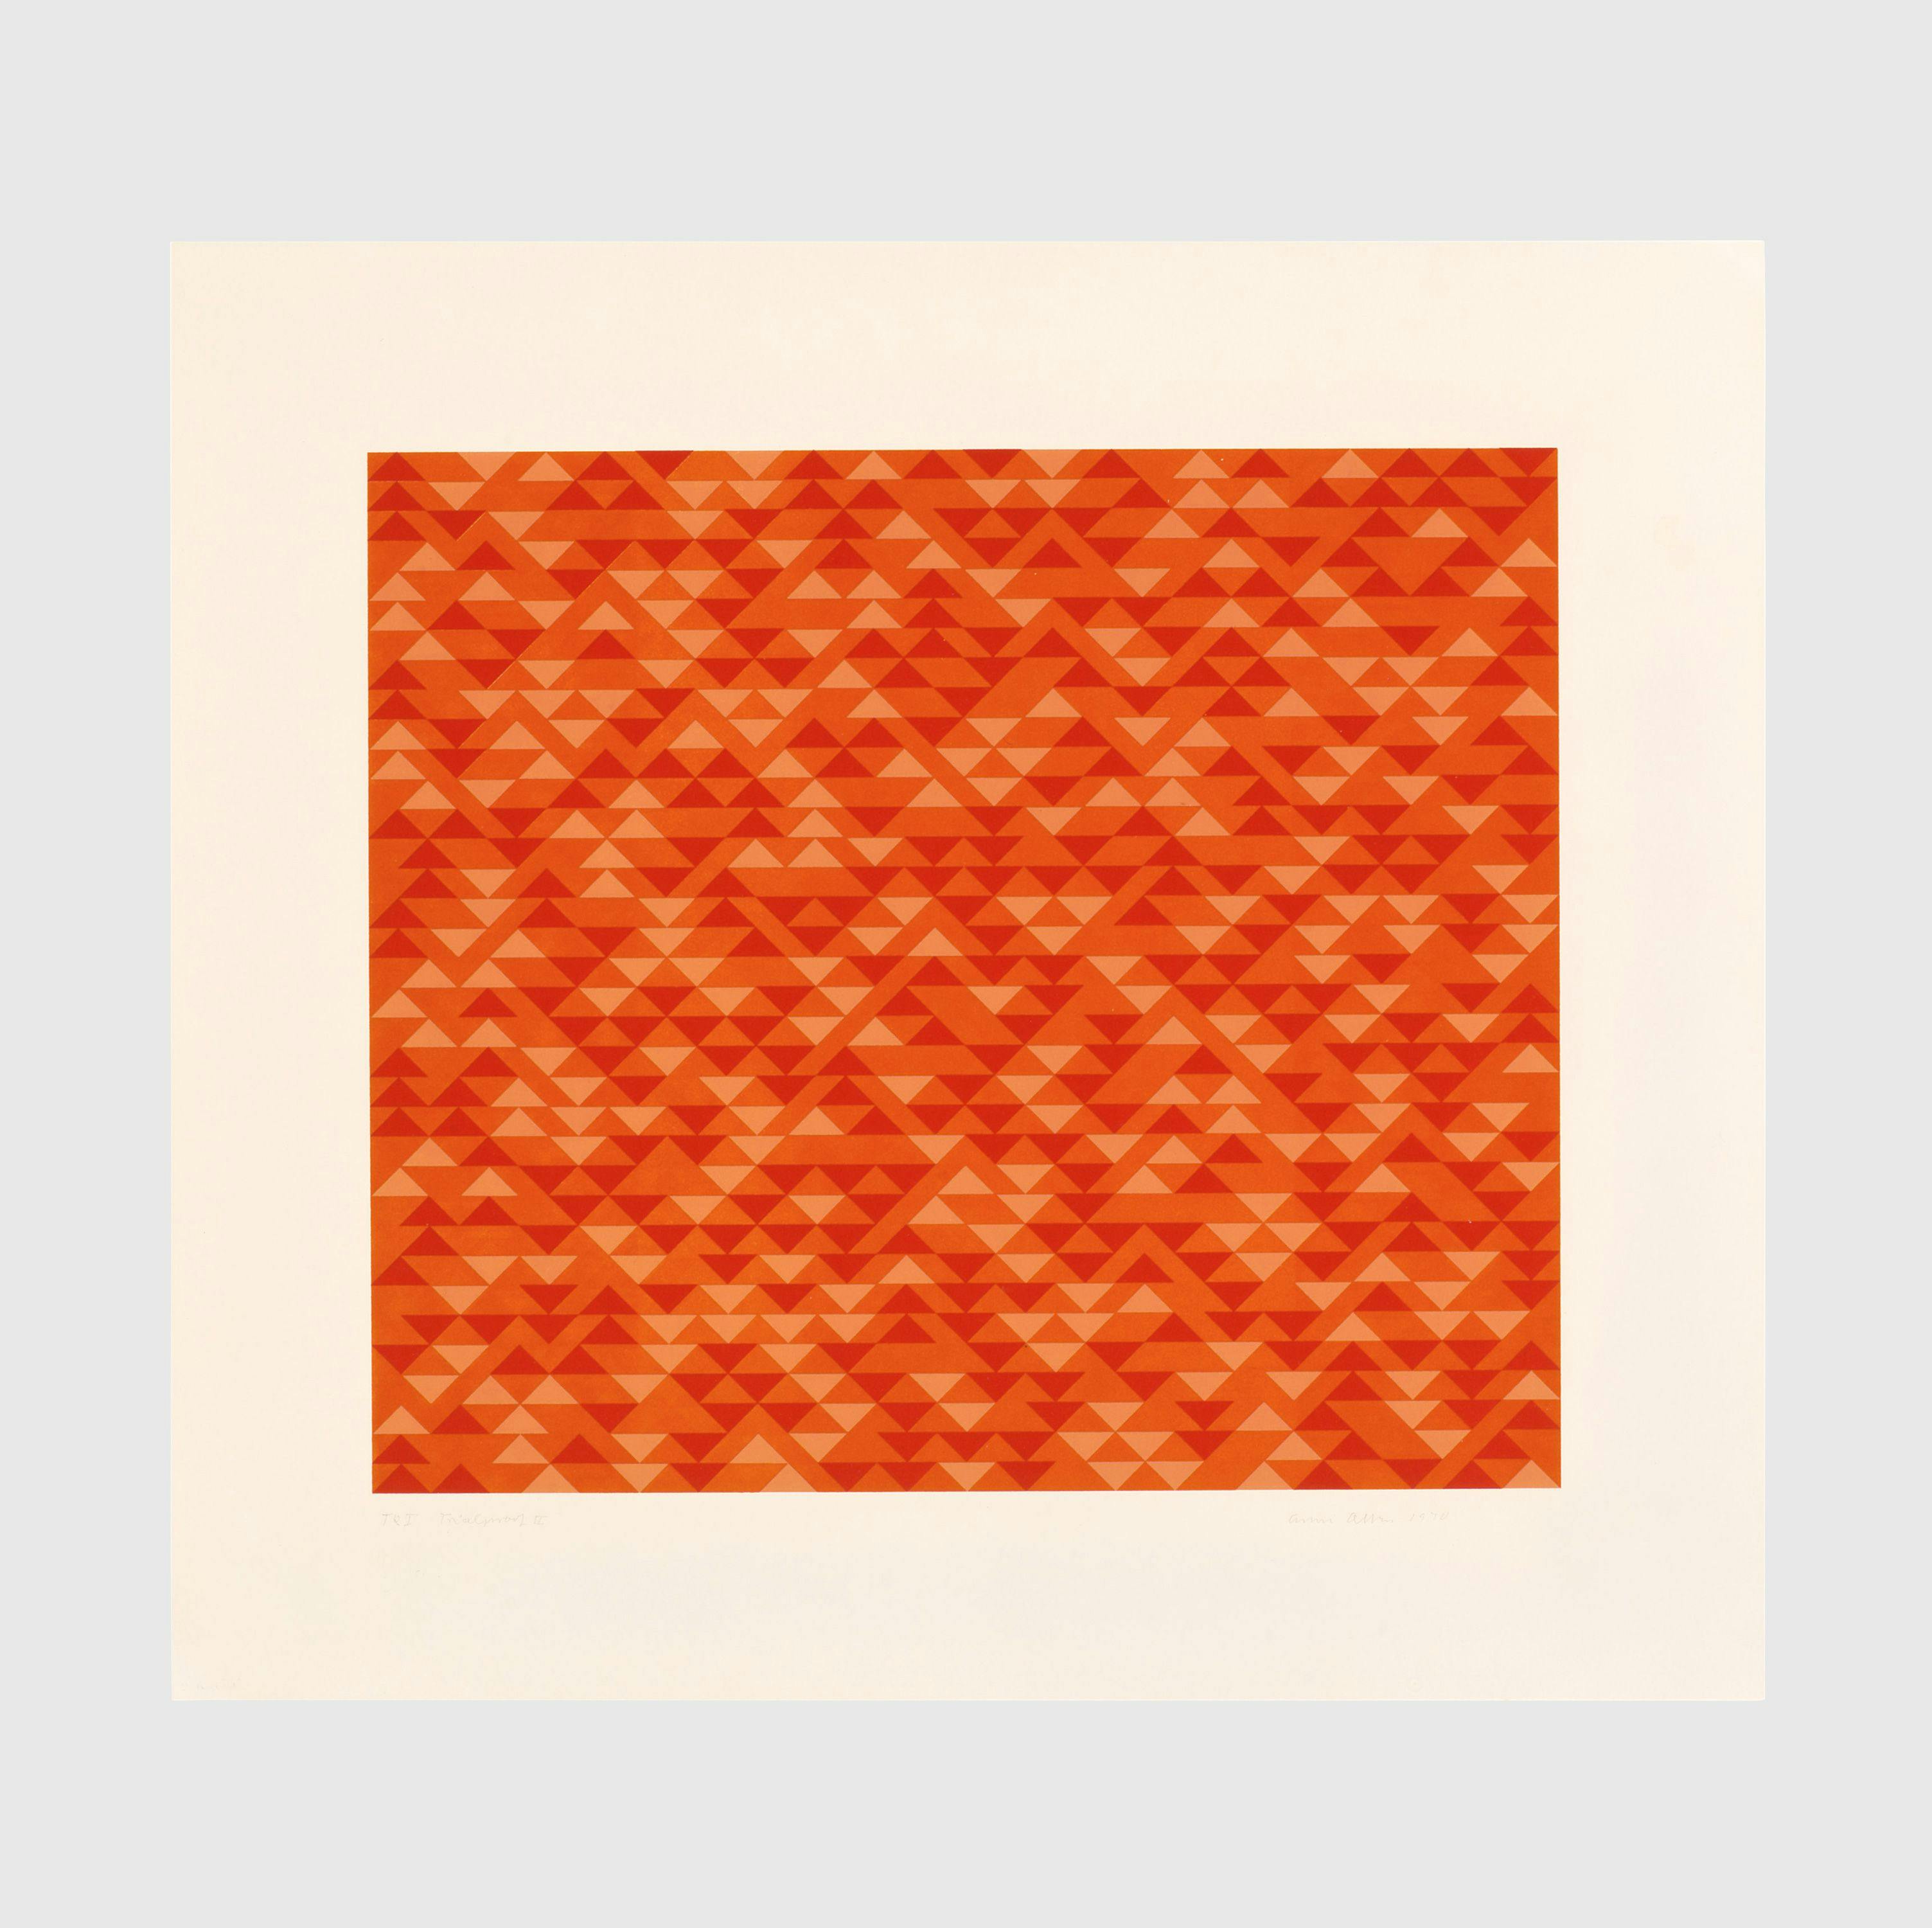 A print by Anni Albers, titled TR I, dated 1970.